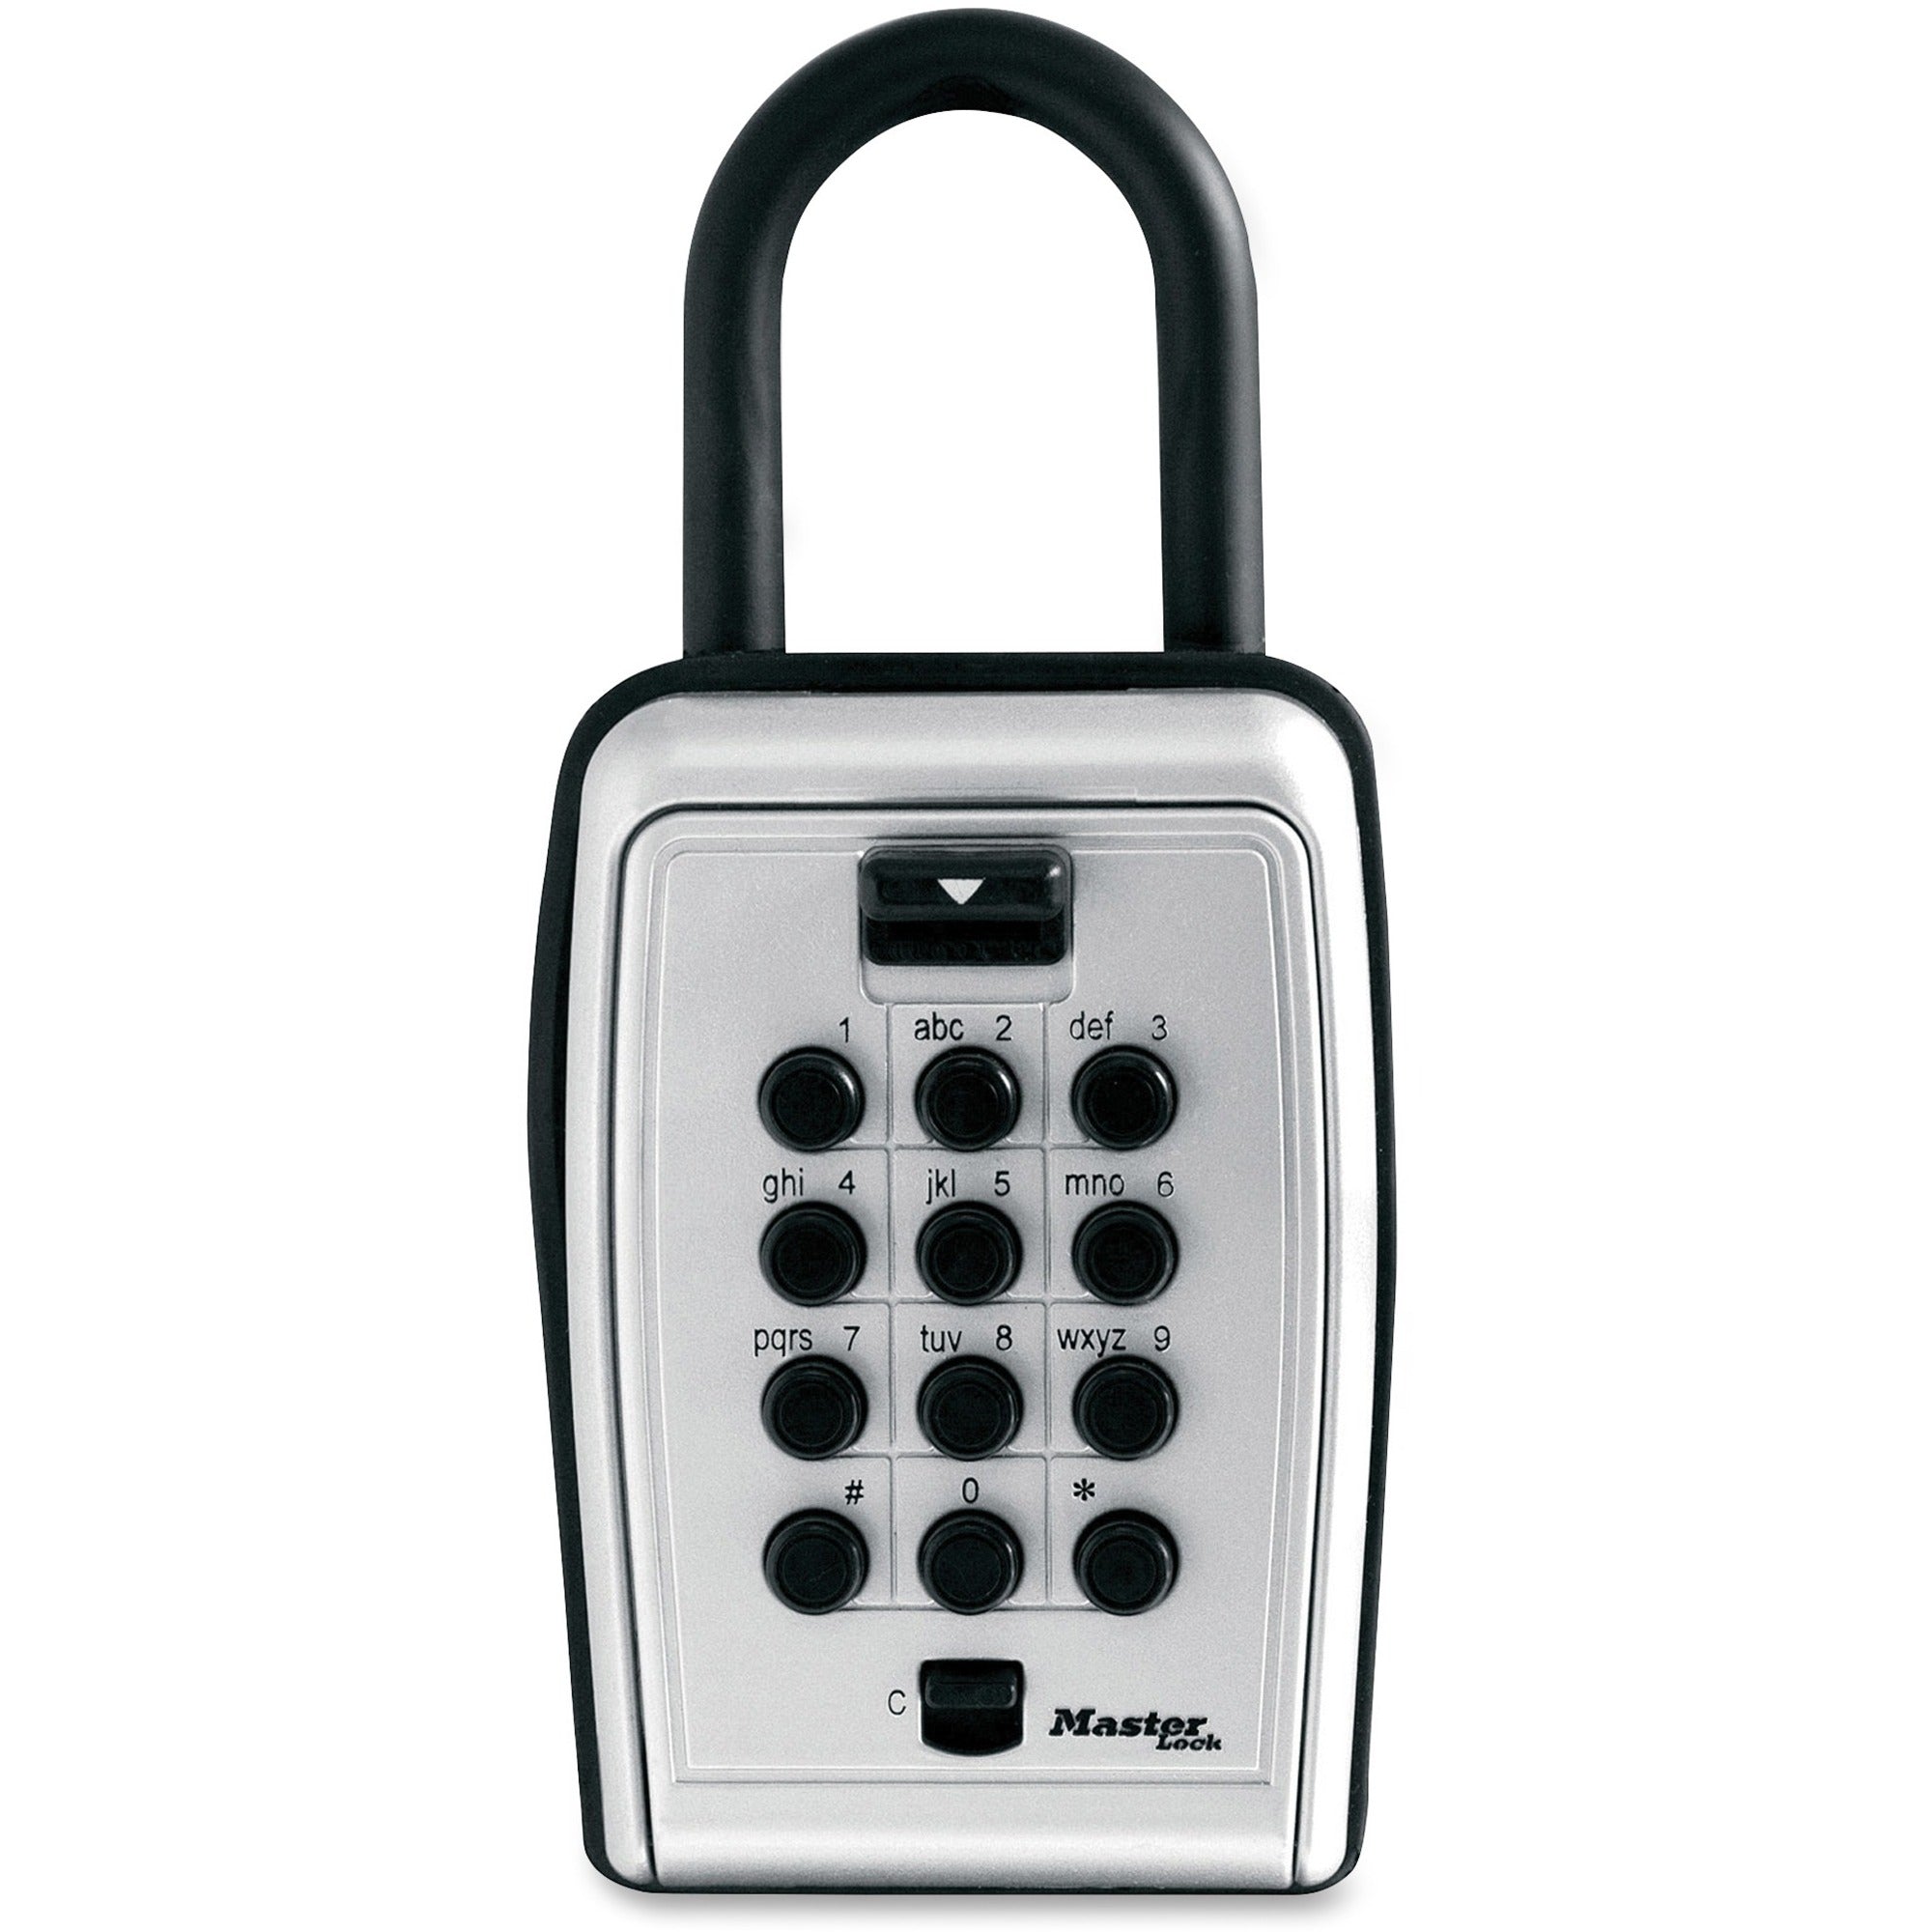 Master Lock Portable Key Safe - Push Button Lock - Weather Resistant, Scratch Resistant - for Door - Overall Size 7.2" x 5.3" x 2.2" - Black, Silver - Metal, Vinyl - 